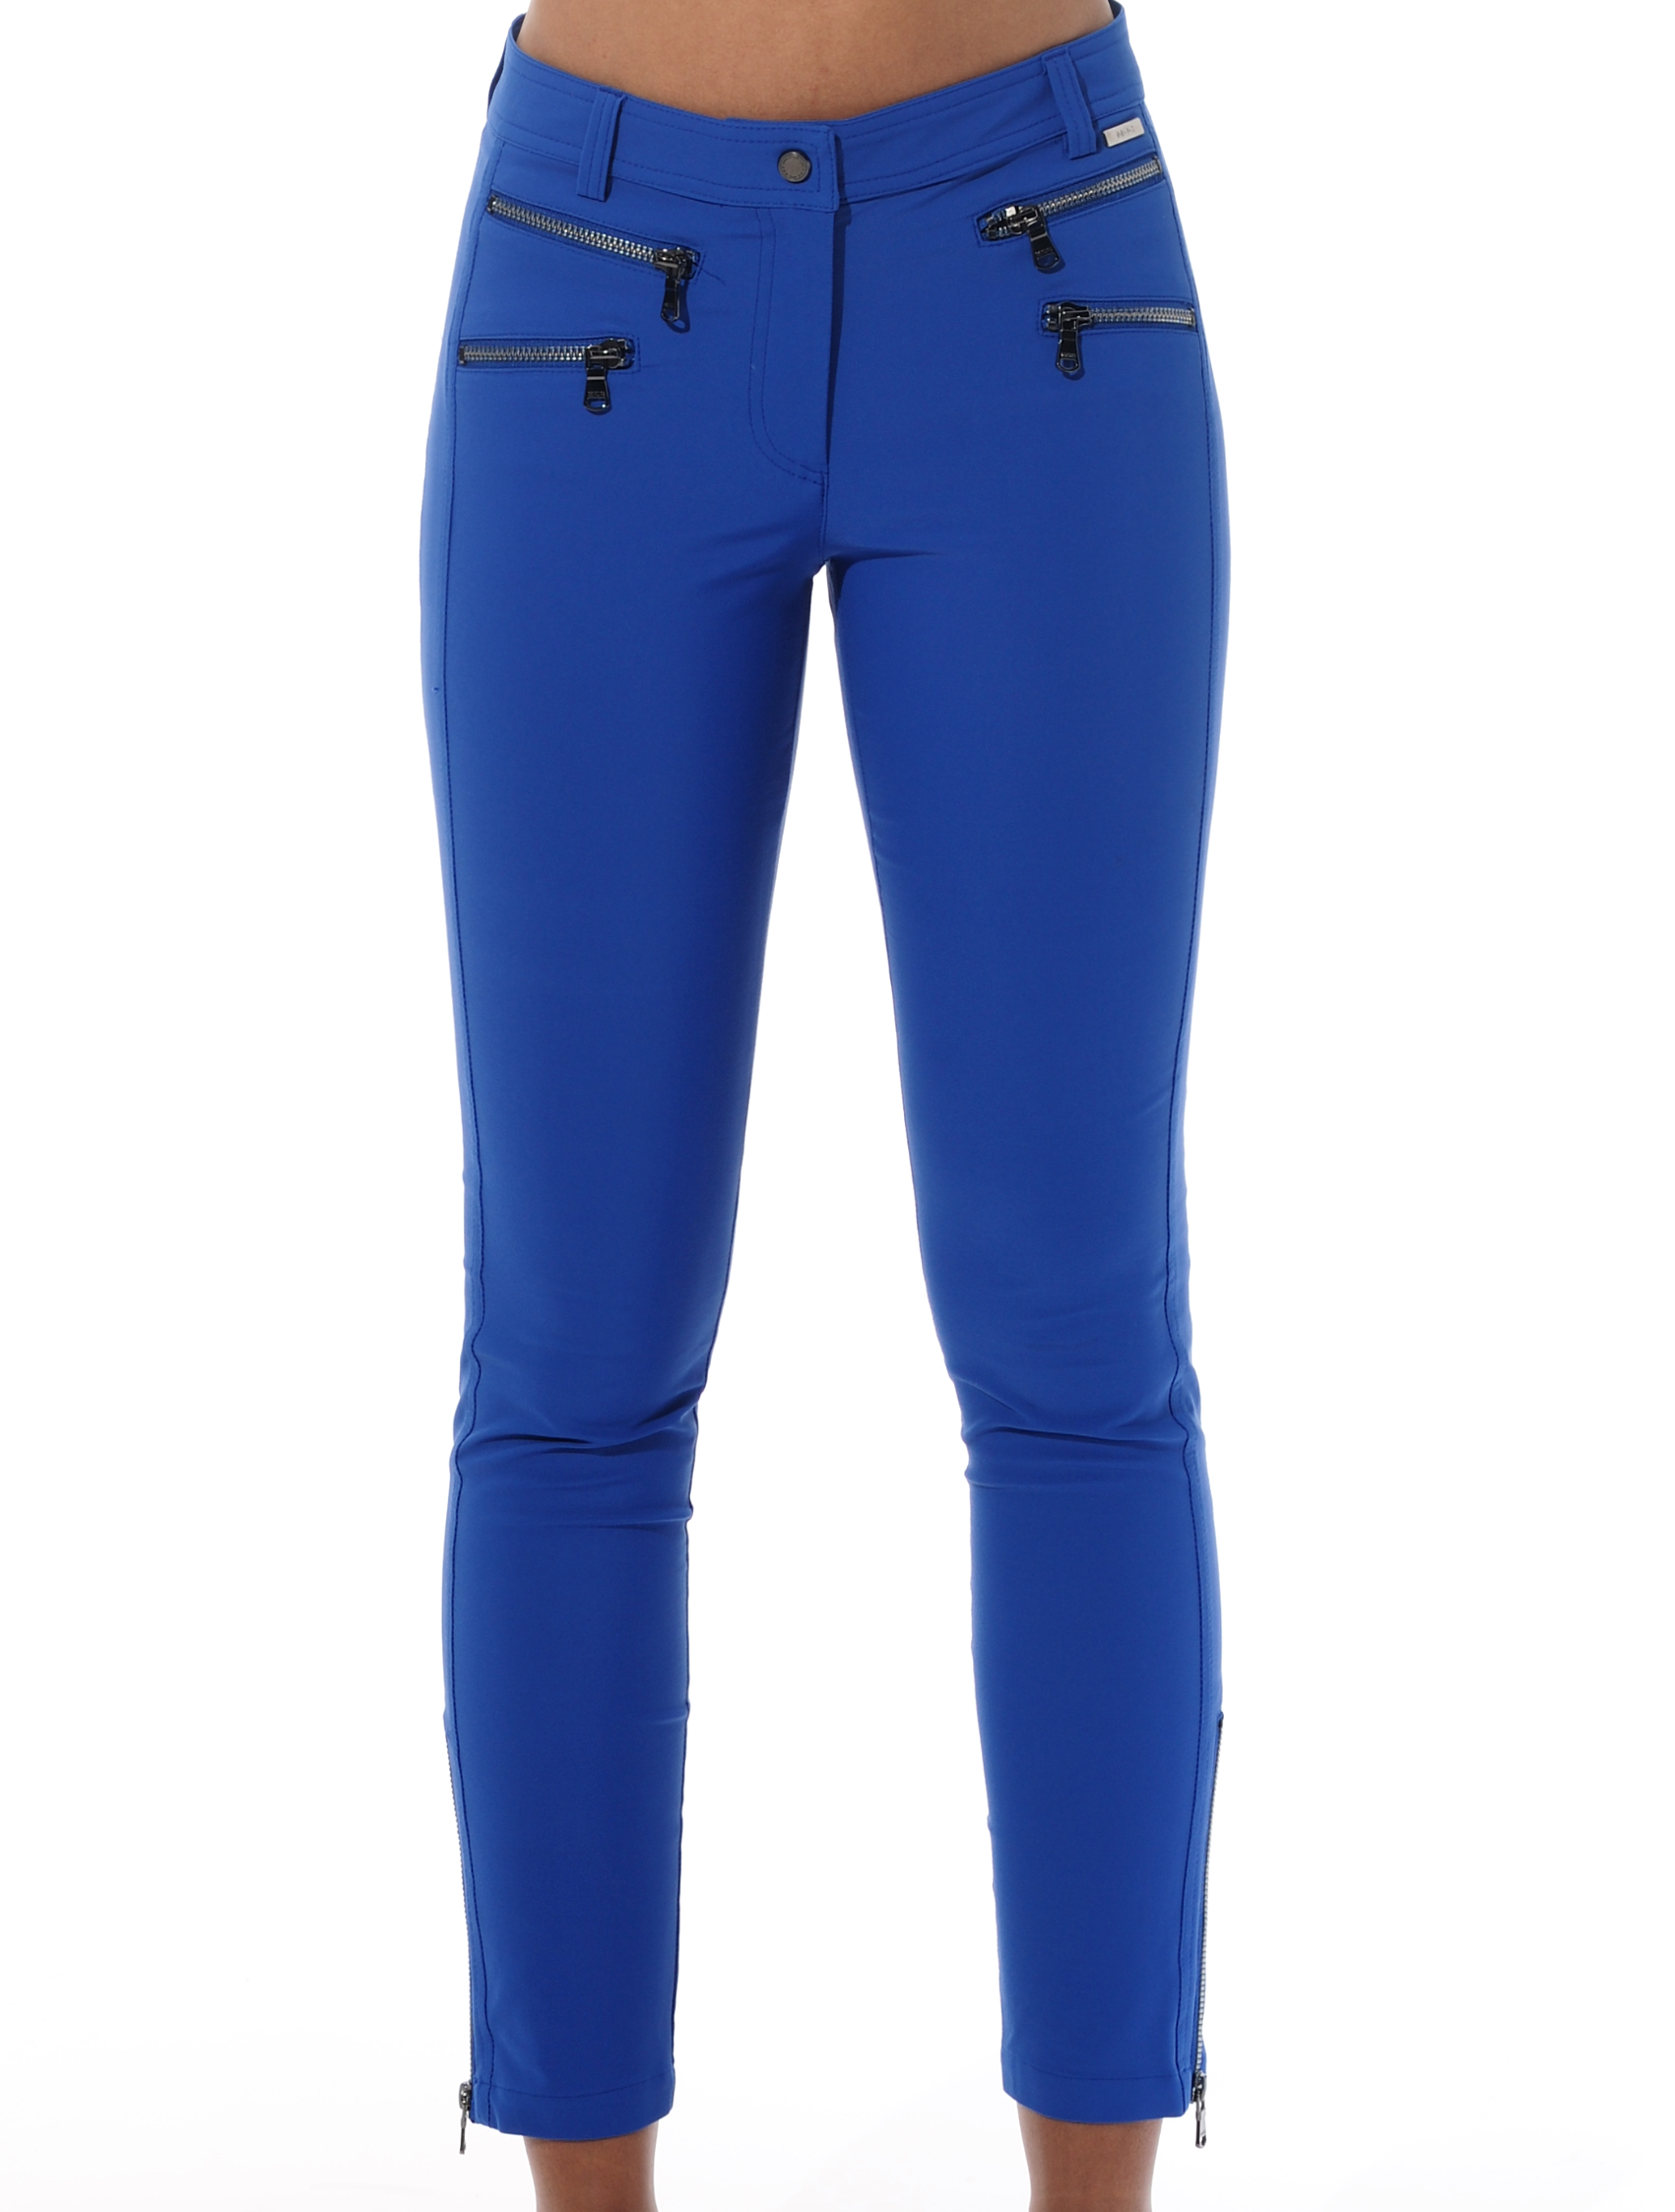 4way stretch double zip ankle pants royal 